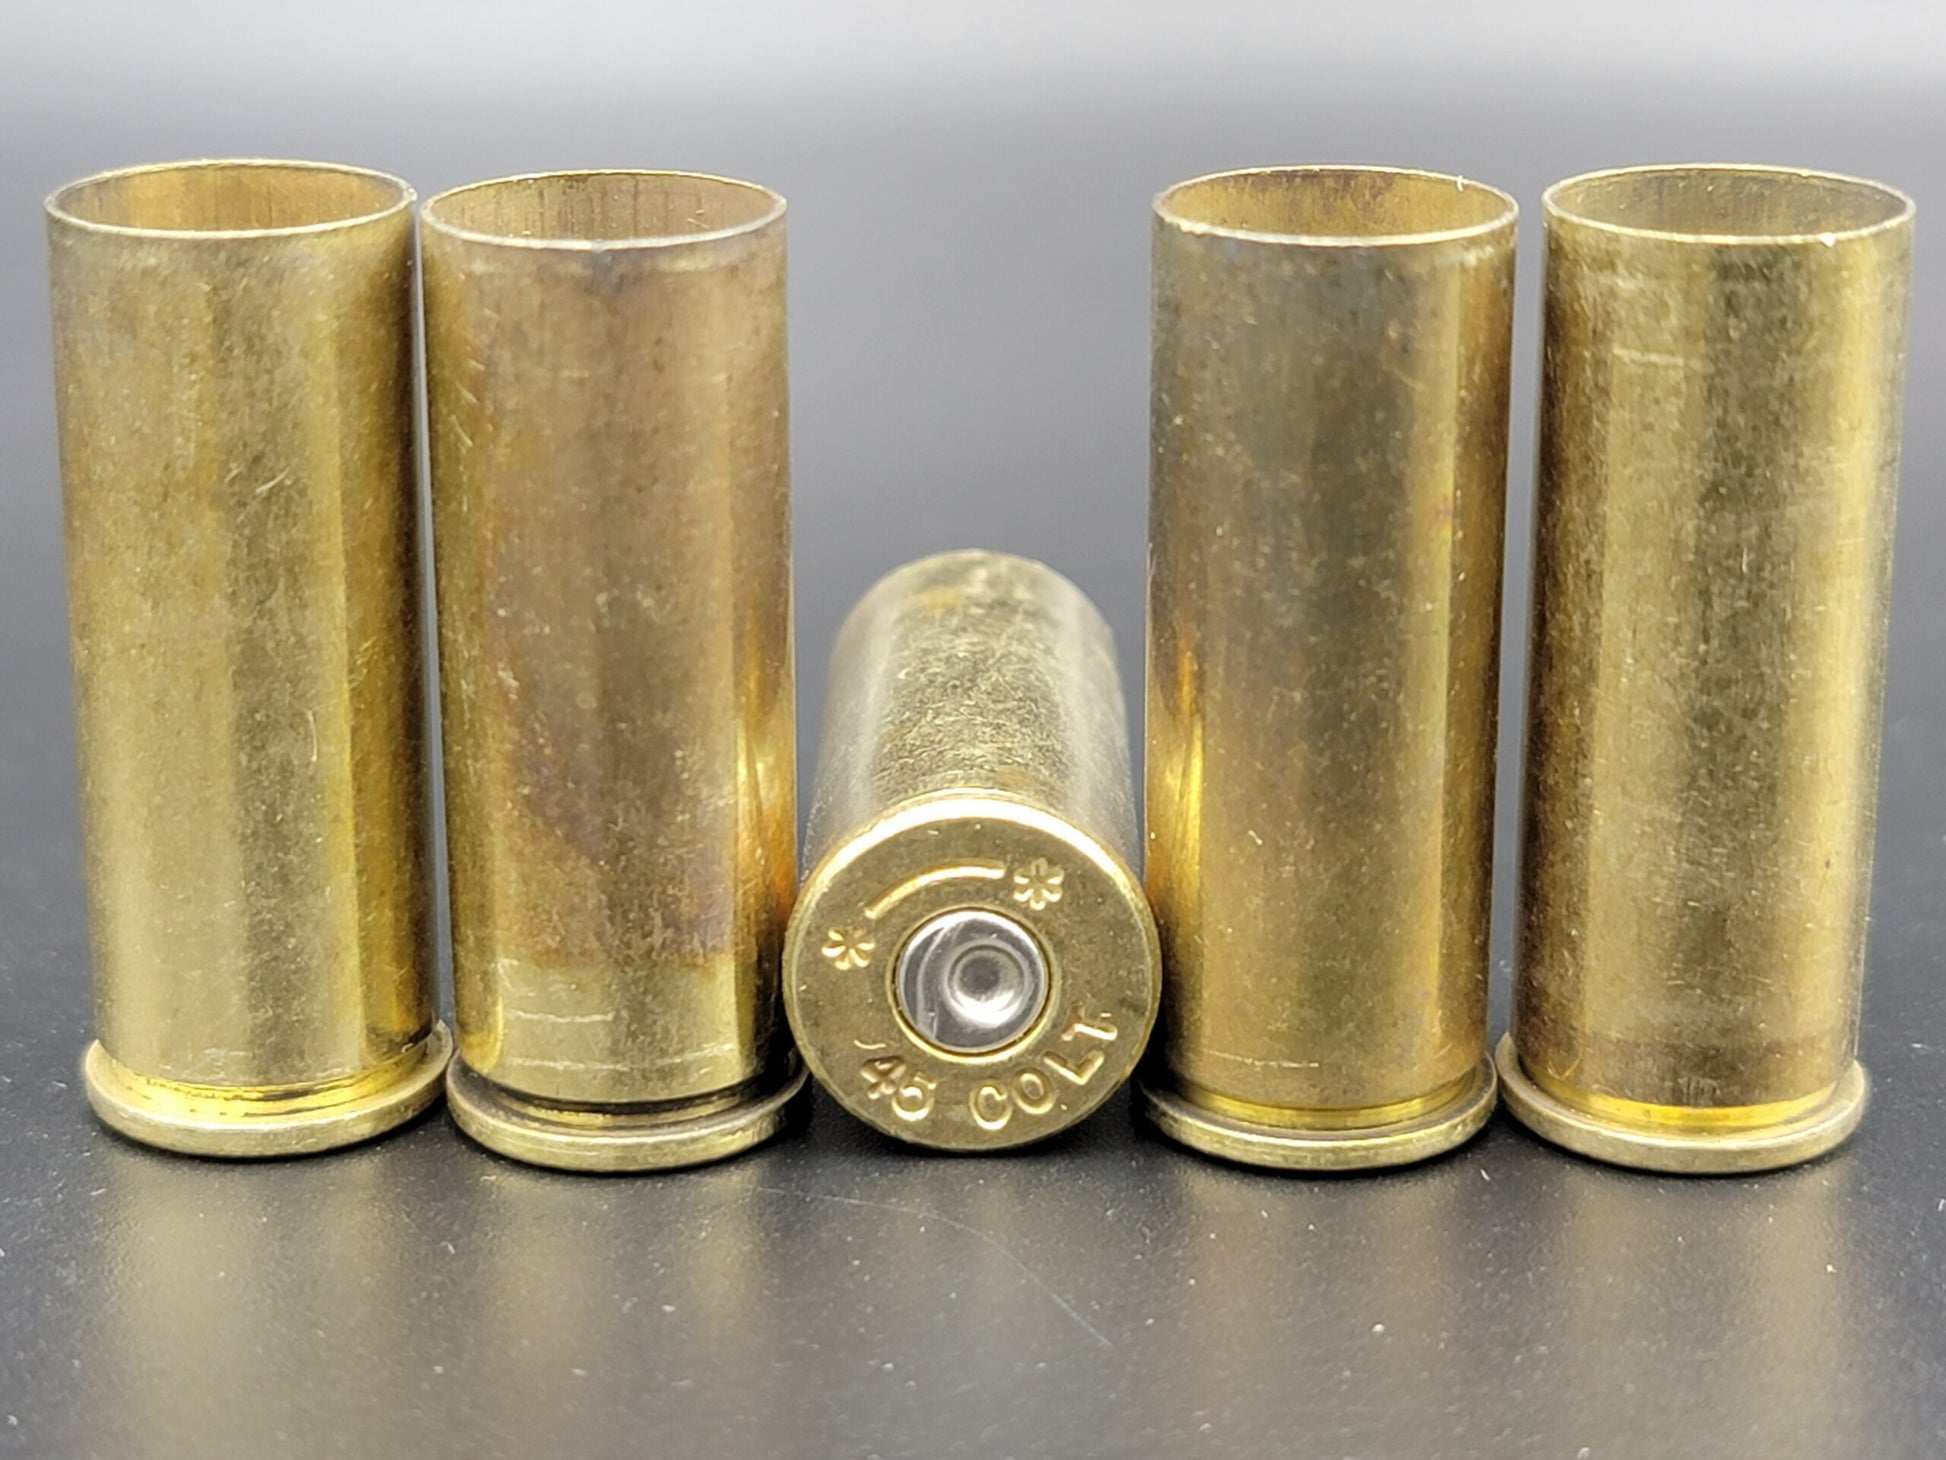 45 Colt once fired pistol brass. Hand sorted from reputable indoor/military ranges for reloading. Reliable spent casings for precision shooting.